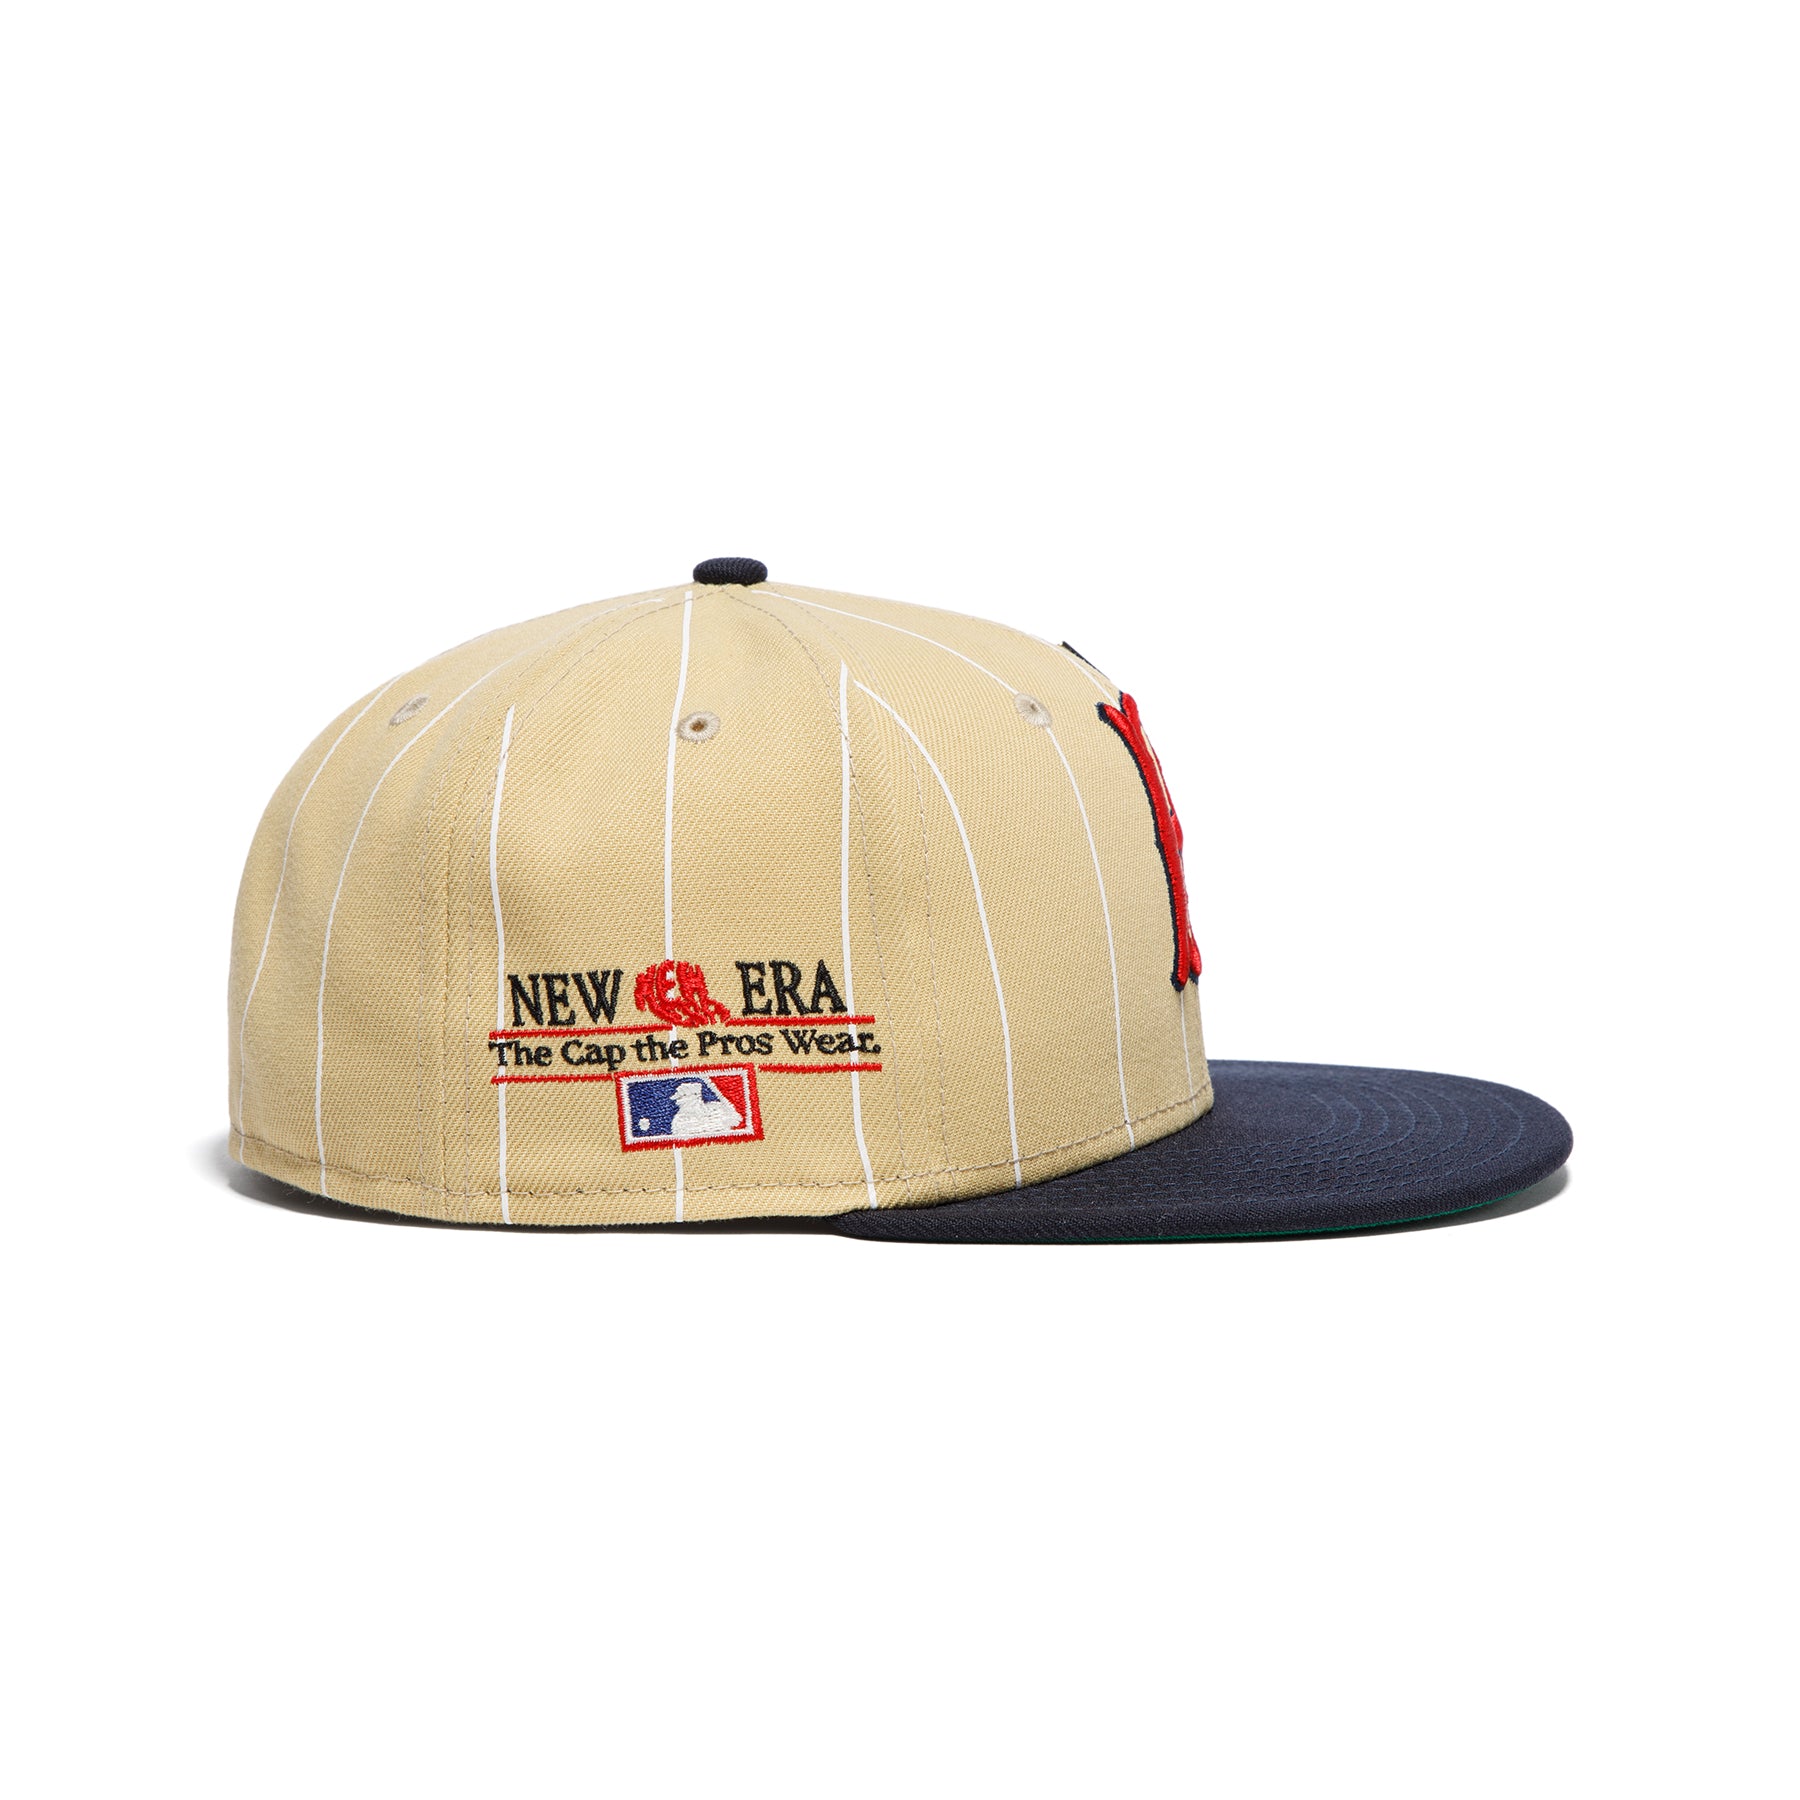 Official New Era Boston Red Sox MLB Vintage Floral Toasted Peanut